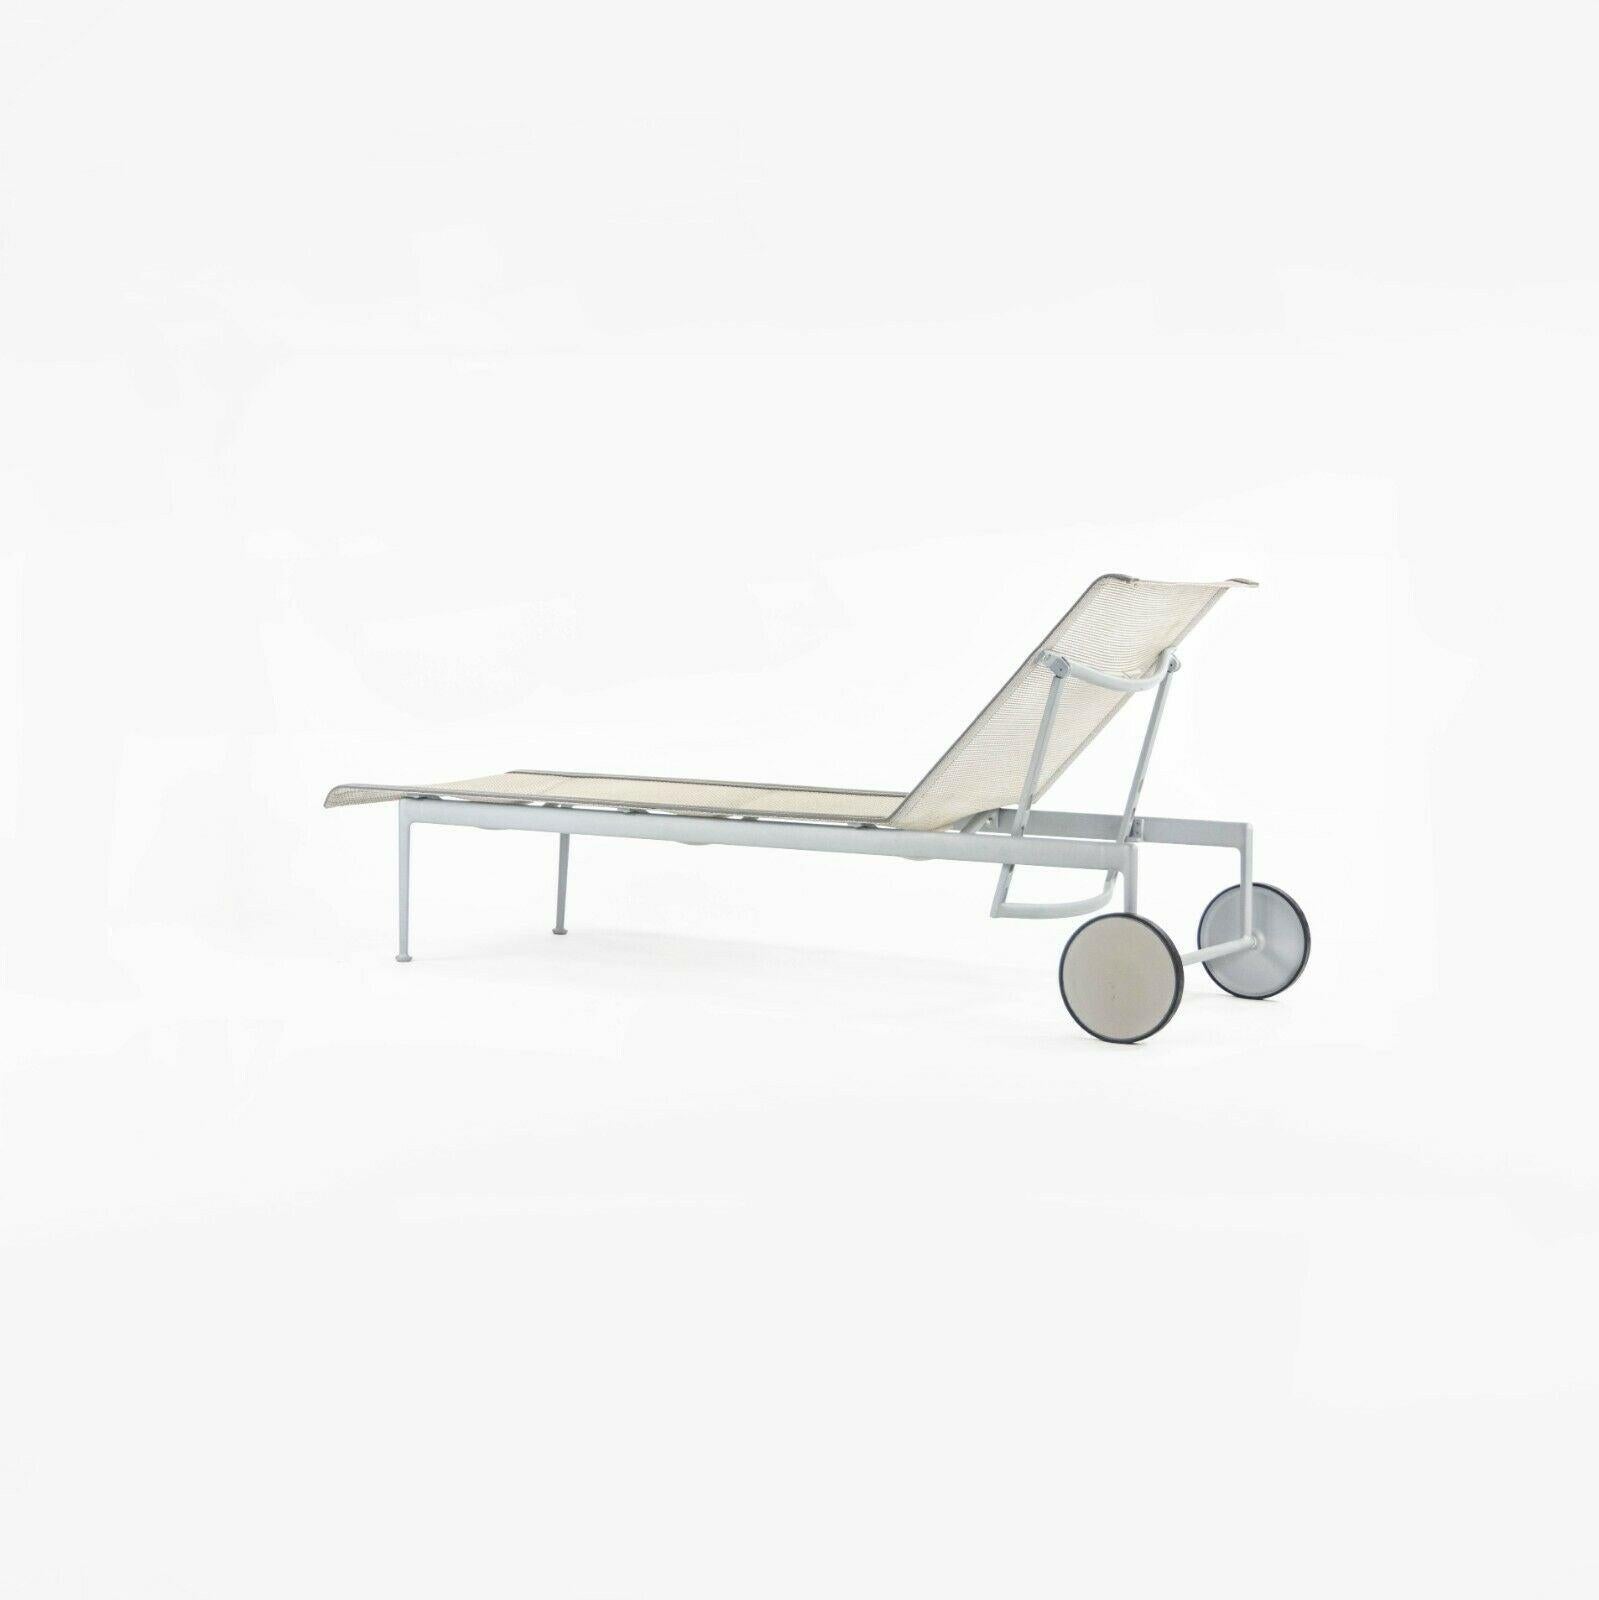 American 2012 Richard Schultz 1966 Series Adjustable Chaise Lounge Chair in Silver